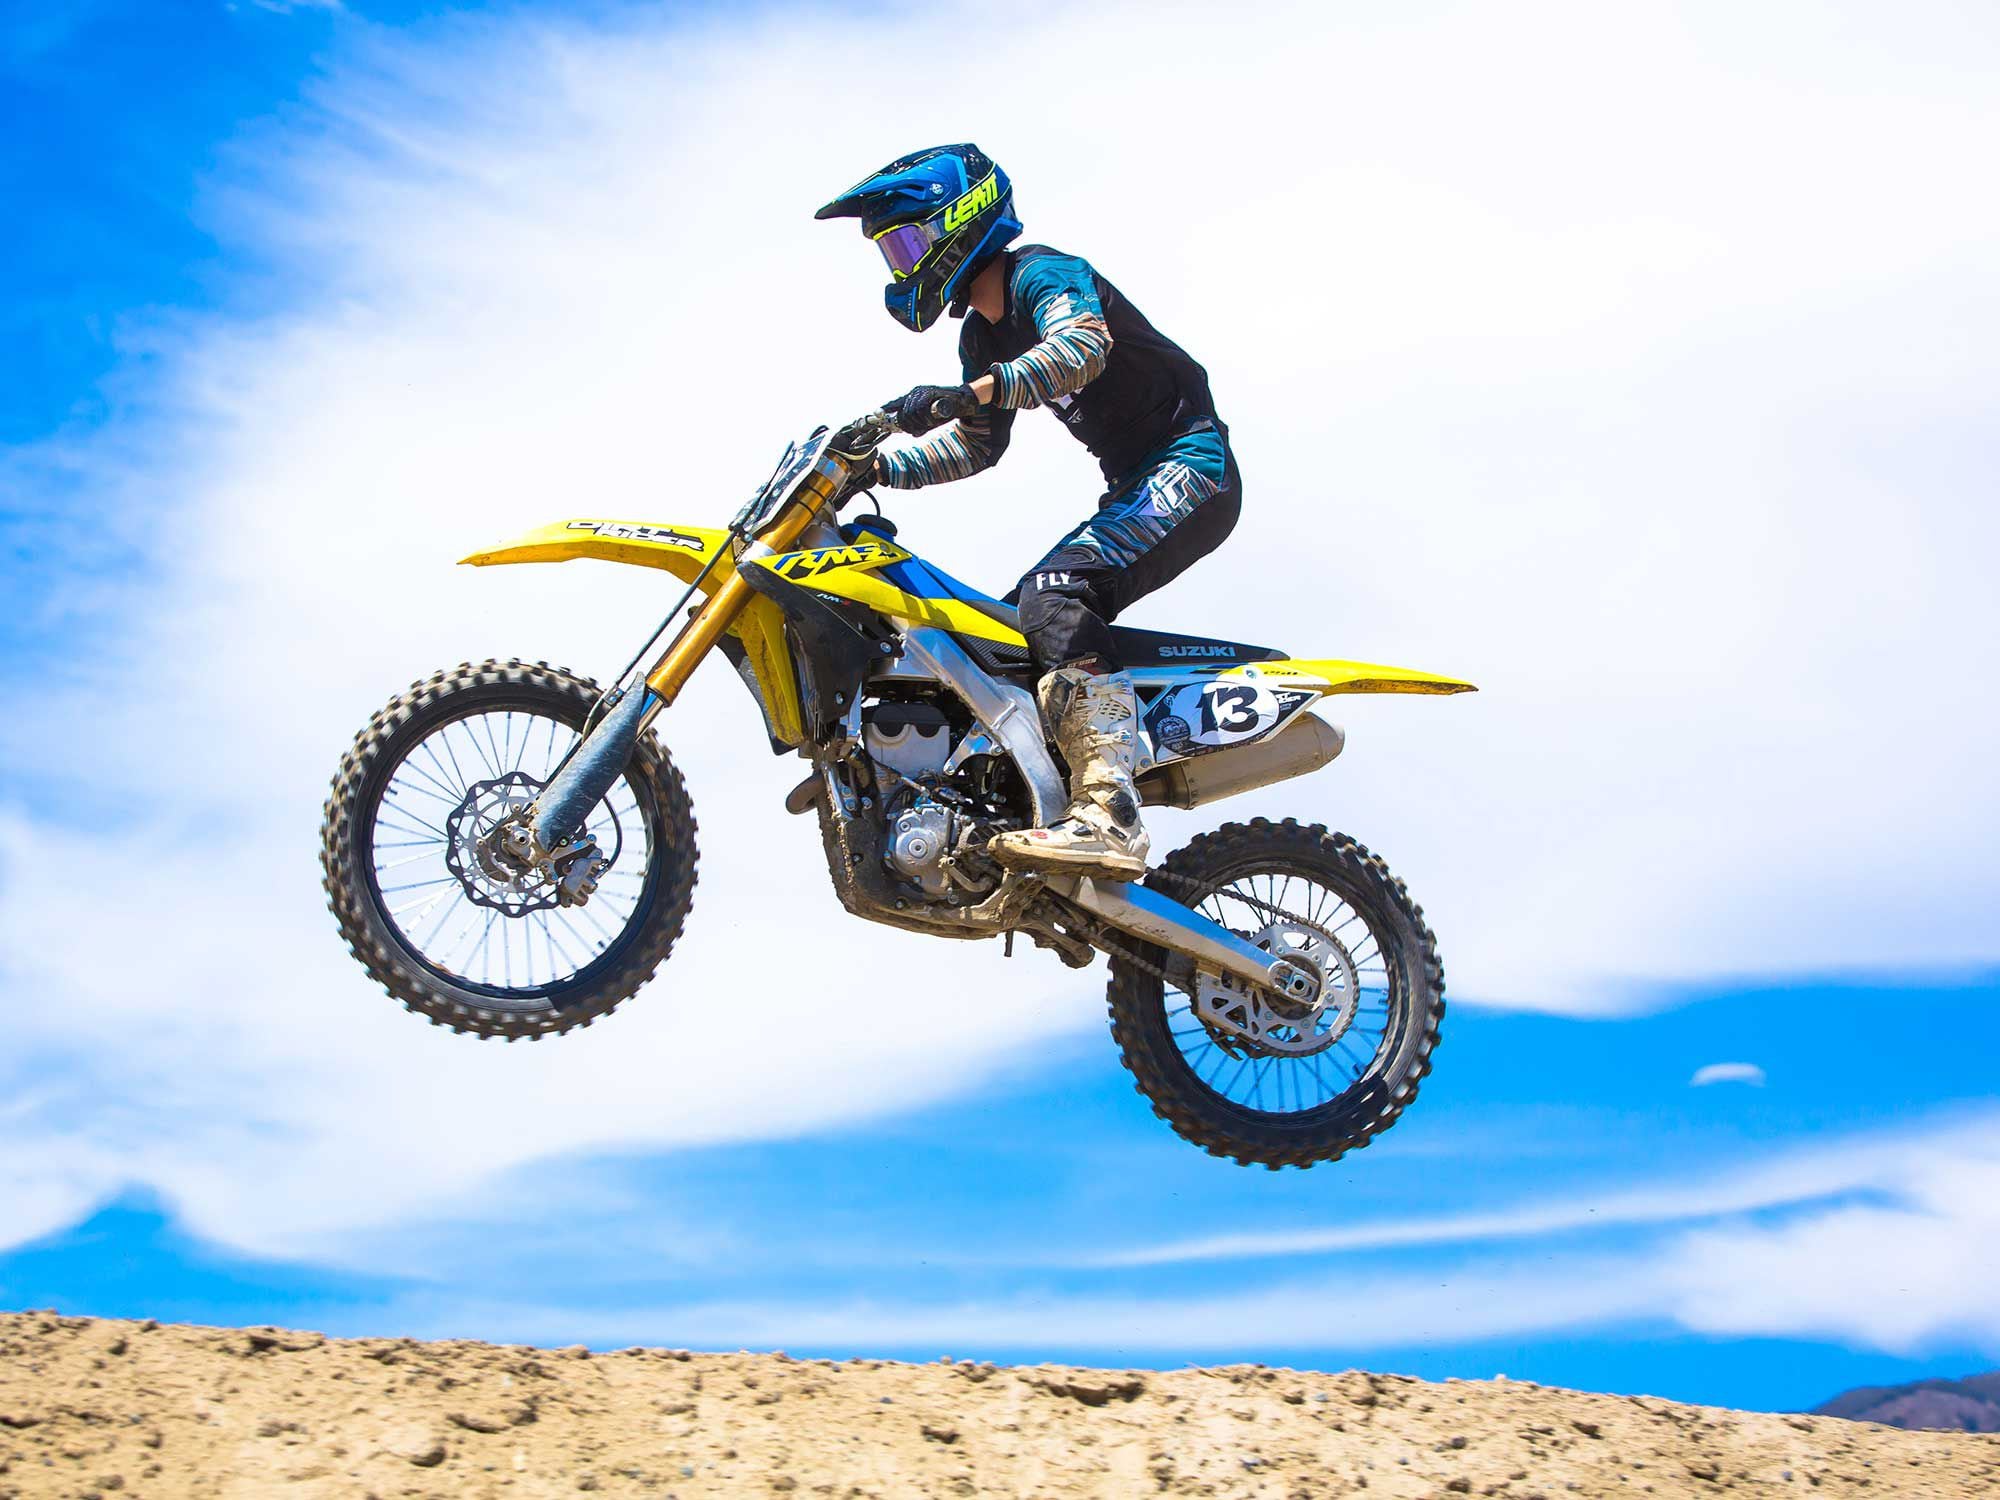 Racing Dirt Bikes and Riding Waves at the 2022 Surfercross